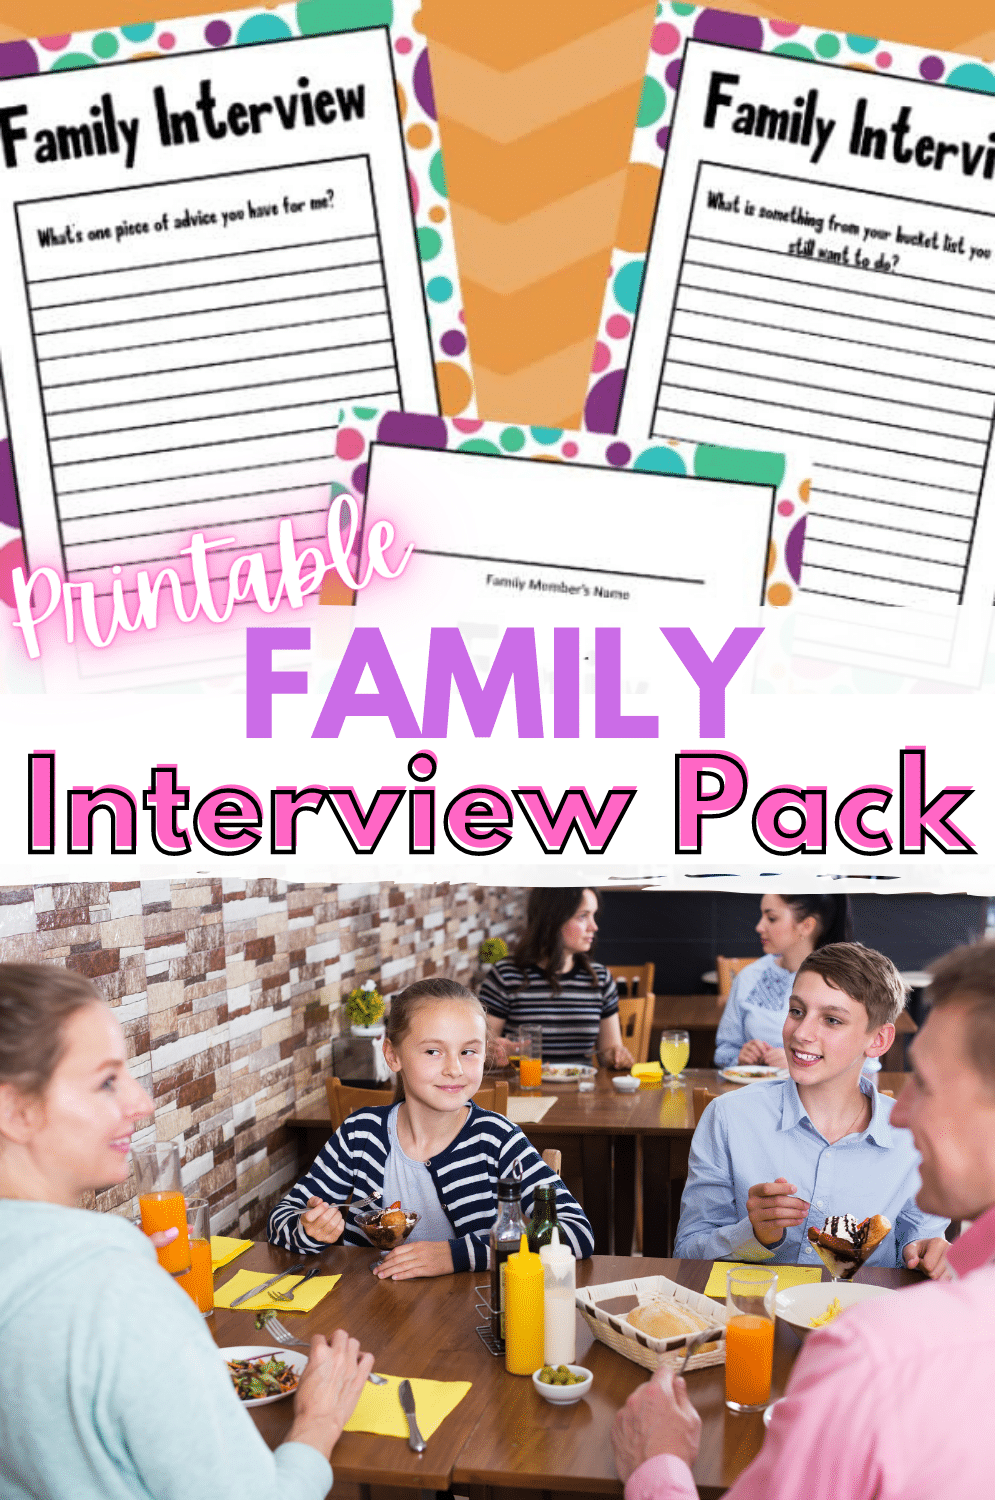 This 14-page printable family interview pack is the perfect way for kids to get to know their older relatives better and hear family stories. #printables #familyinterview #freeprintables via @wondermomwannab